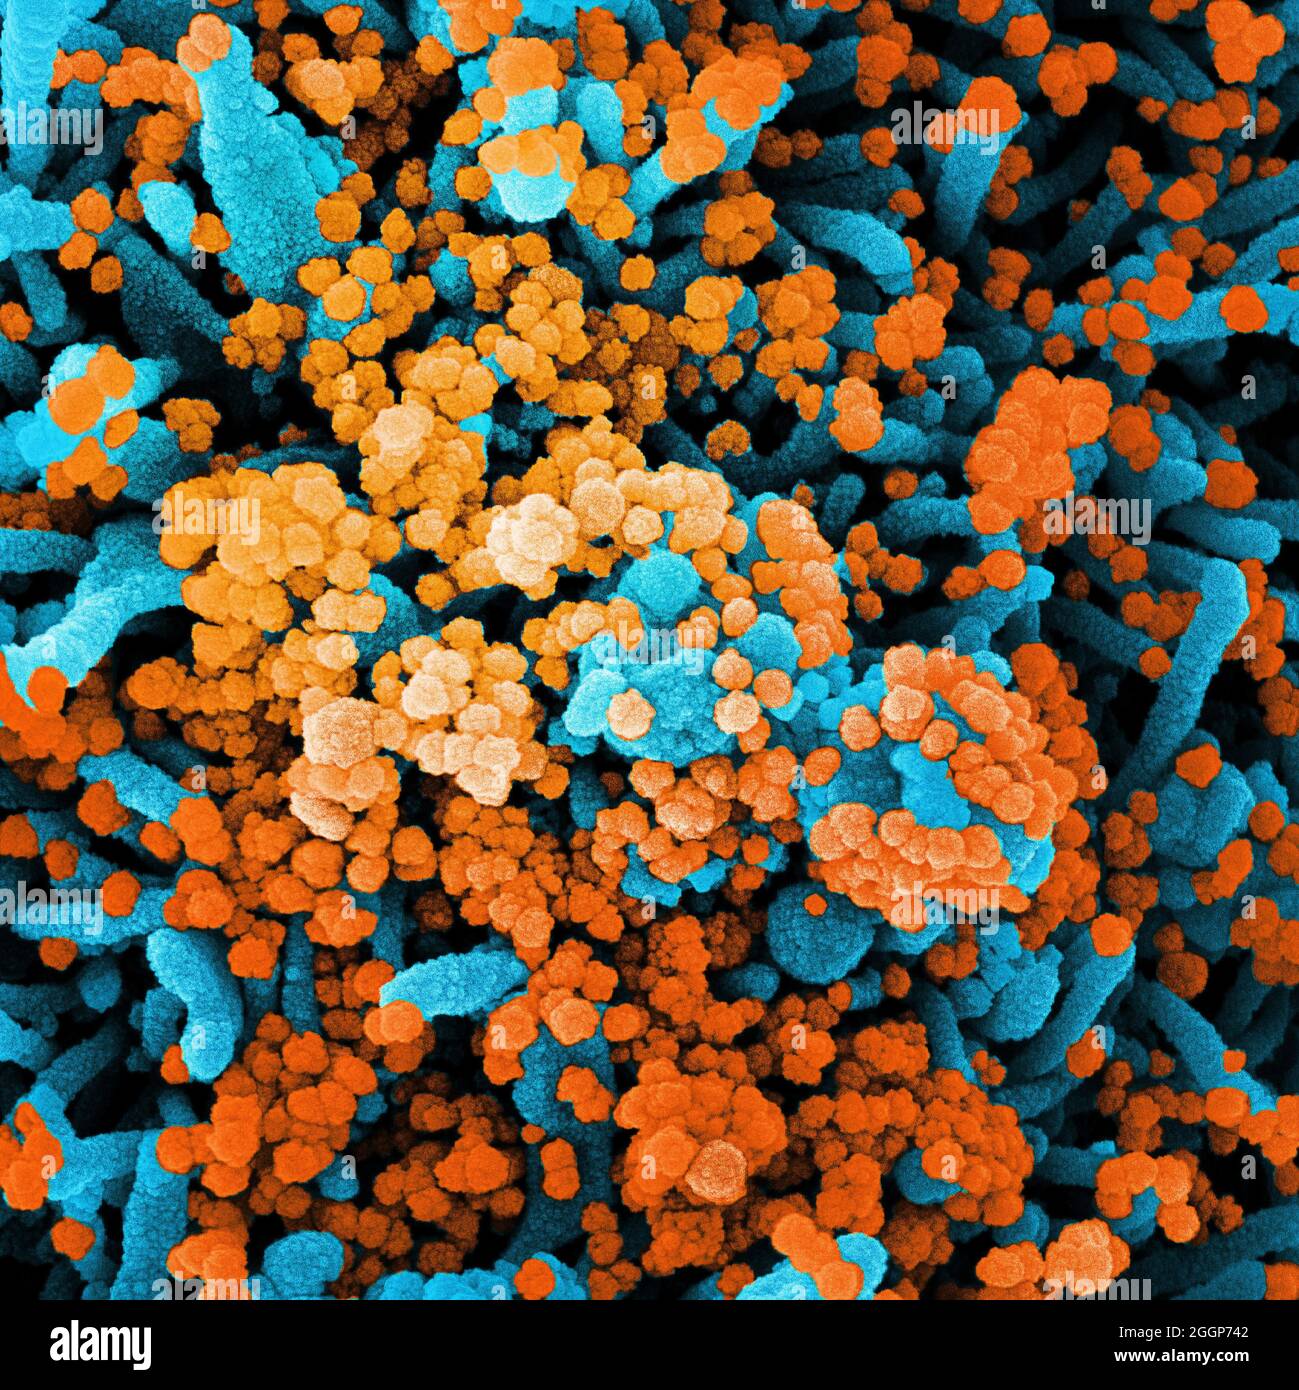 Scanning electron micrograph of a cell heavily infected with SARS-CoV-2 virus particles (orange), isolated from a patient sample. Stock Photo